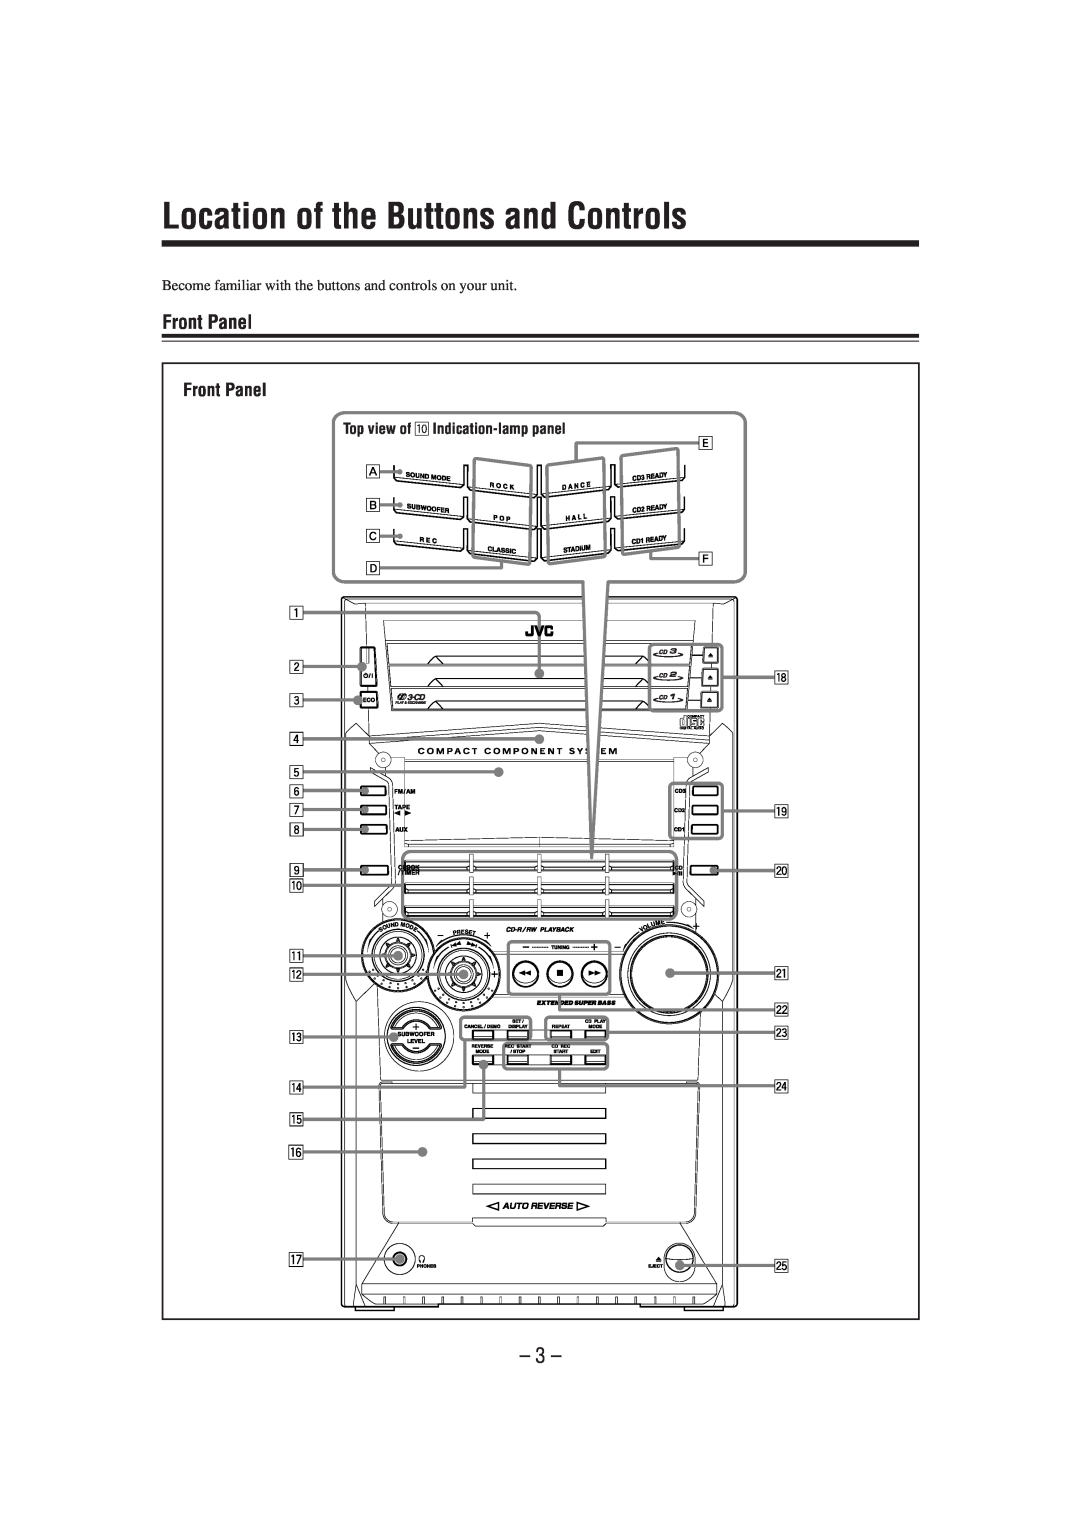 JVC CA-HXZ1R manual Location of the Buttons and Controls, Front Panel, Mode, Ound, Lume O, Eset, Compact Digital Audio 